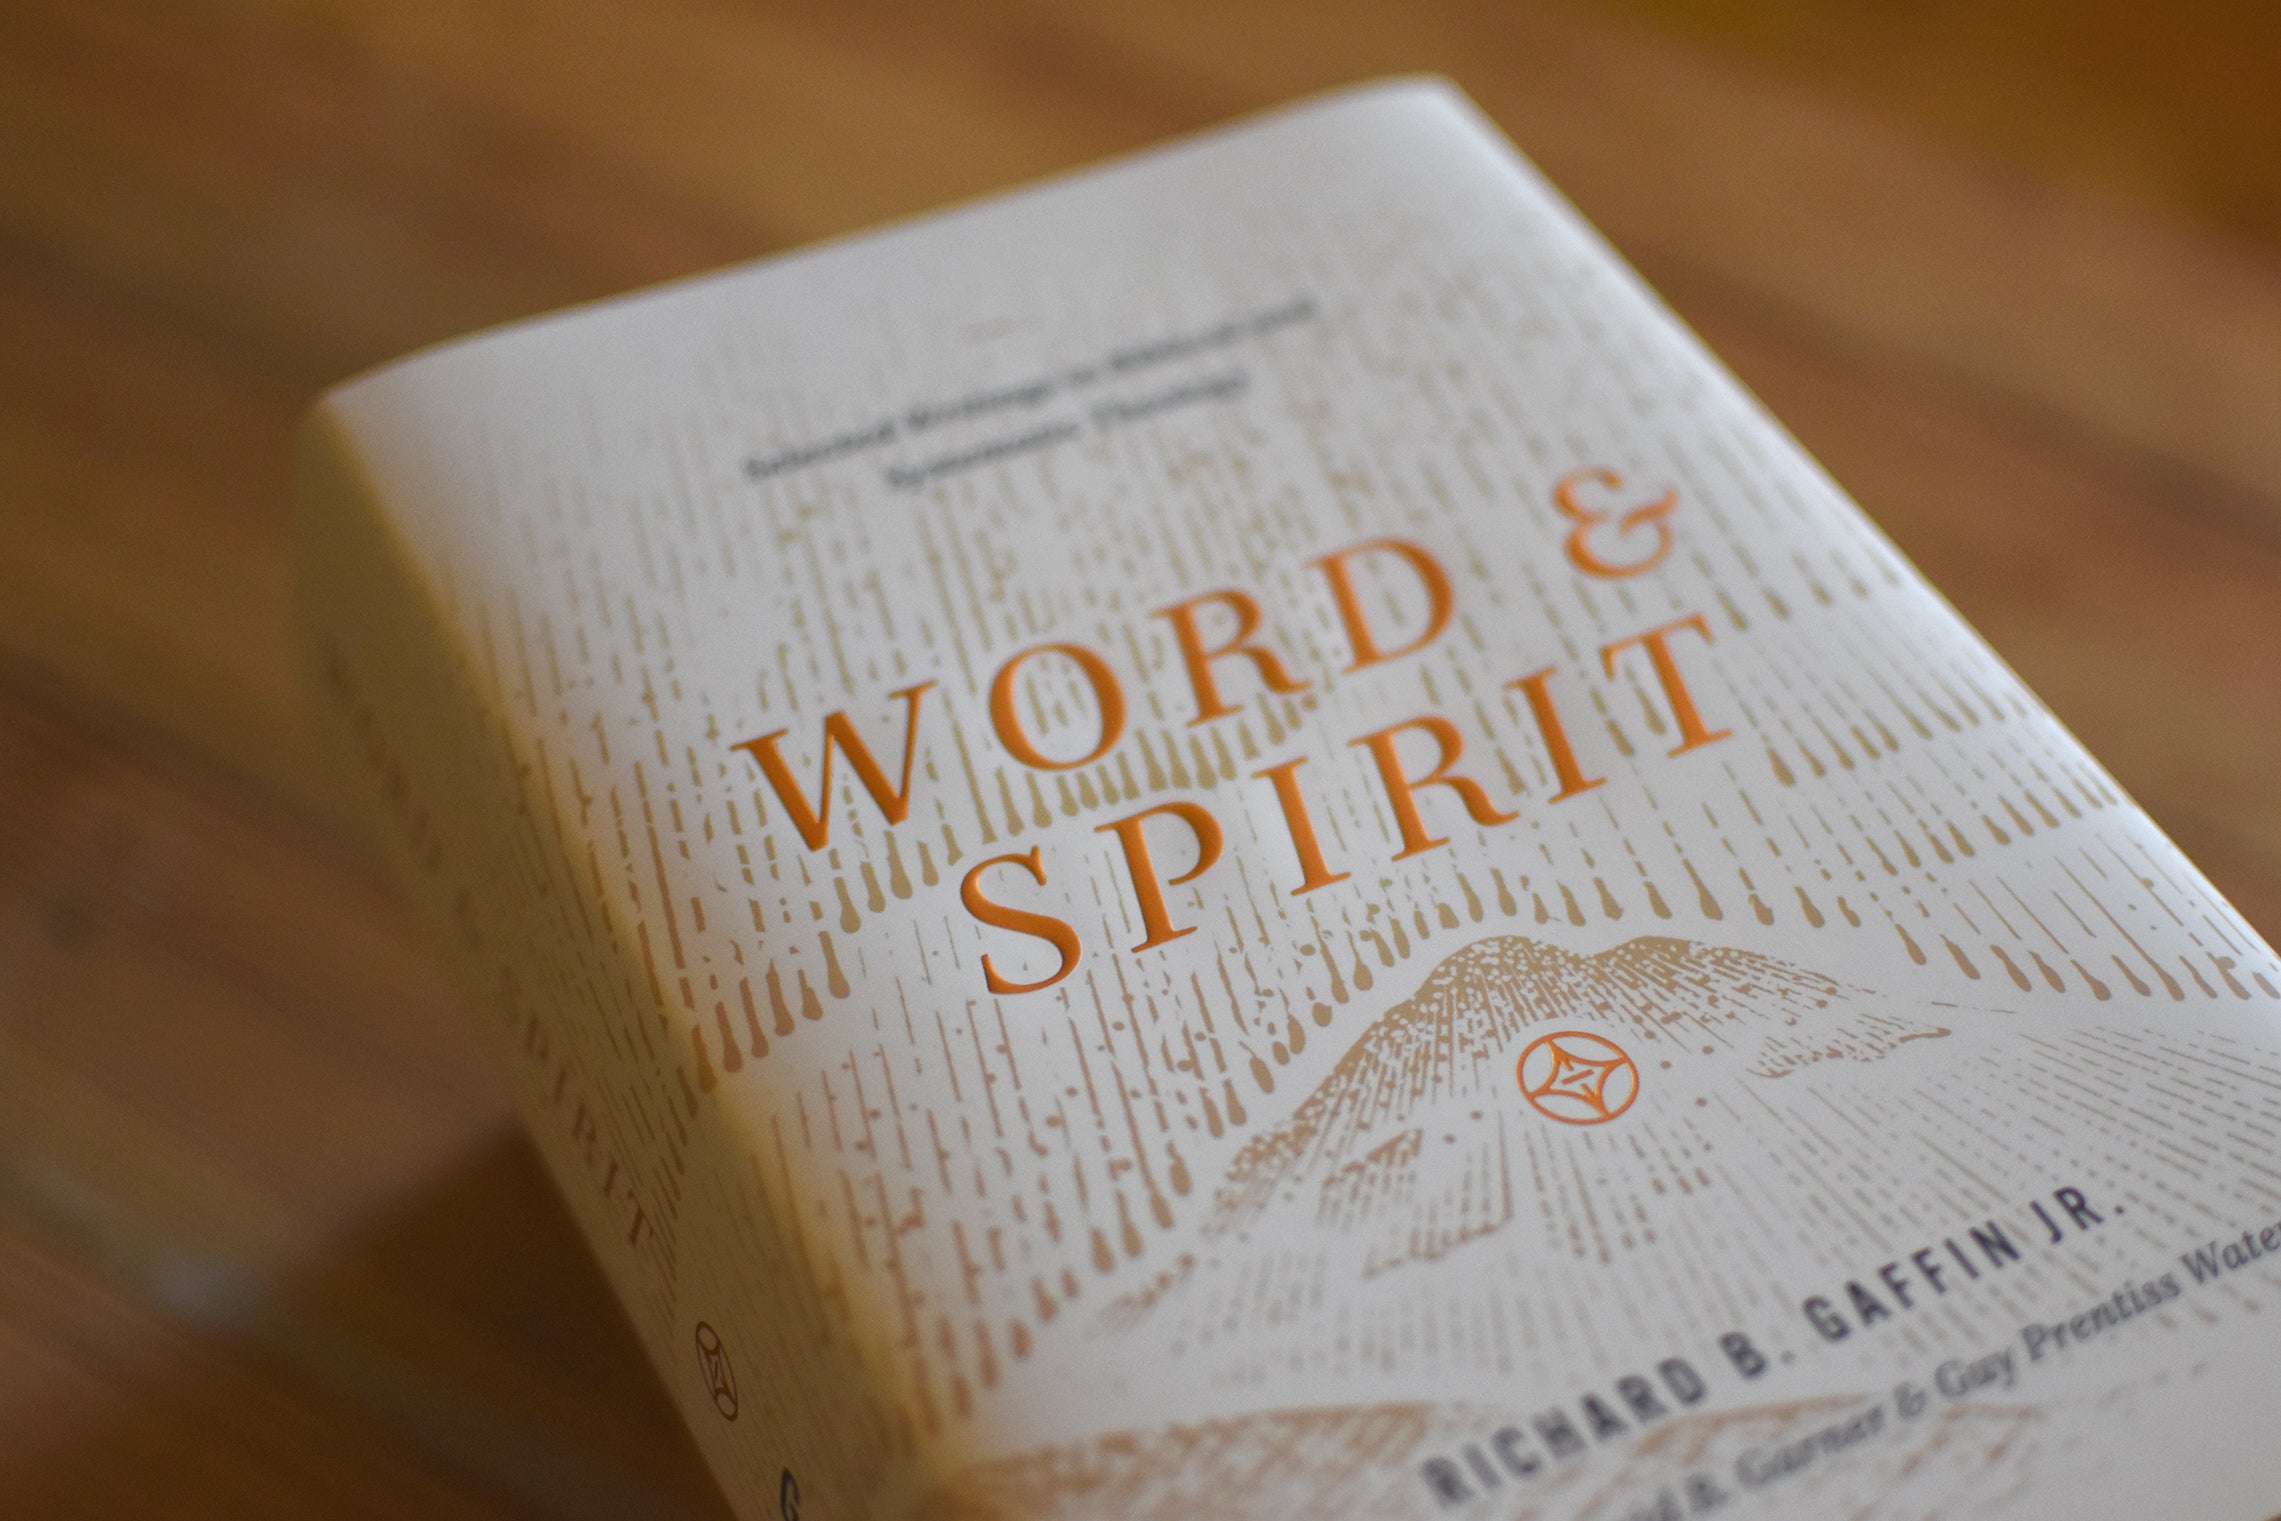 Word and Spirit: Selected Writings in Biblical and Systematic Theology